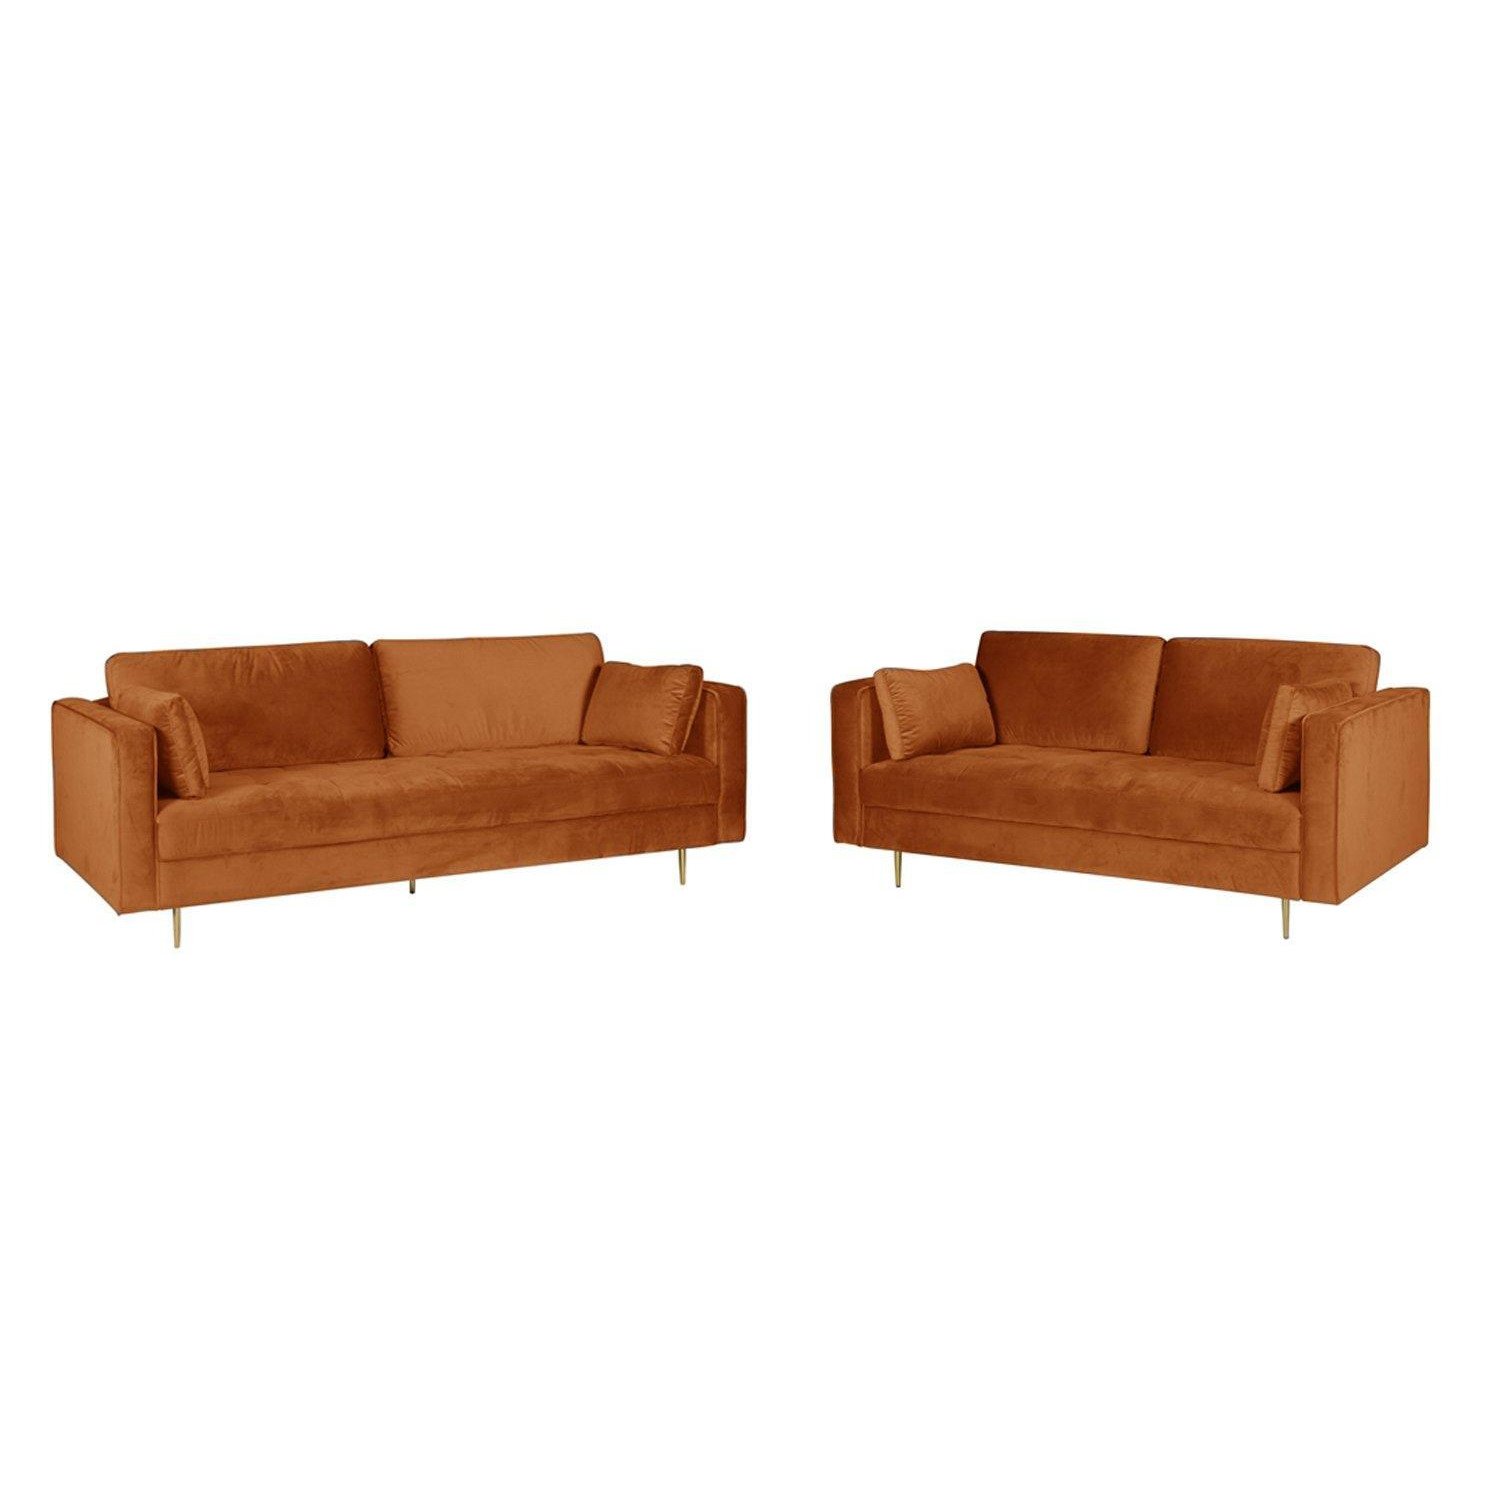 Avery 3+2 Seater Sofa Set with Scatter Cushions - image 1